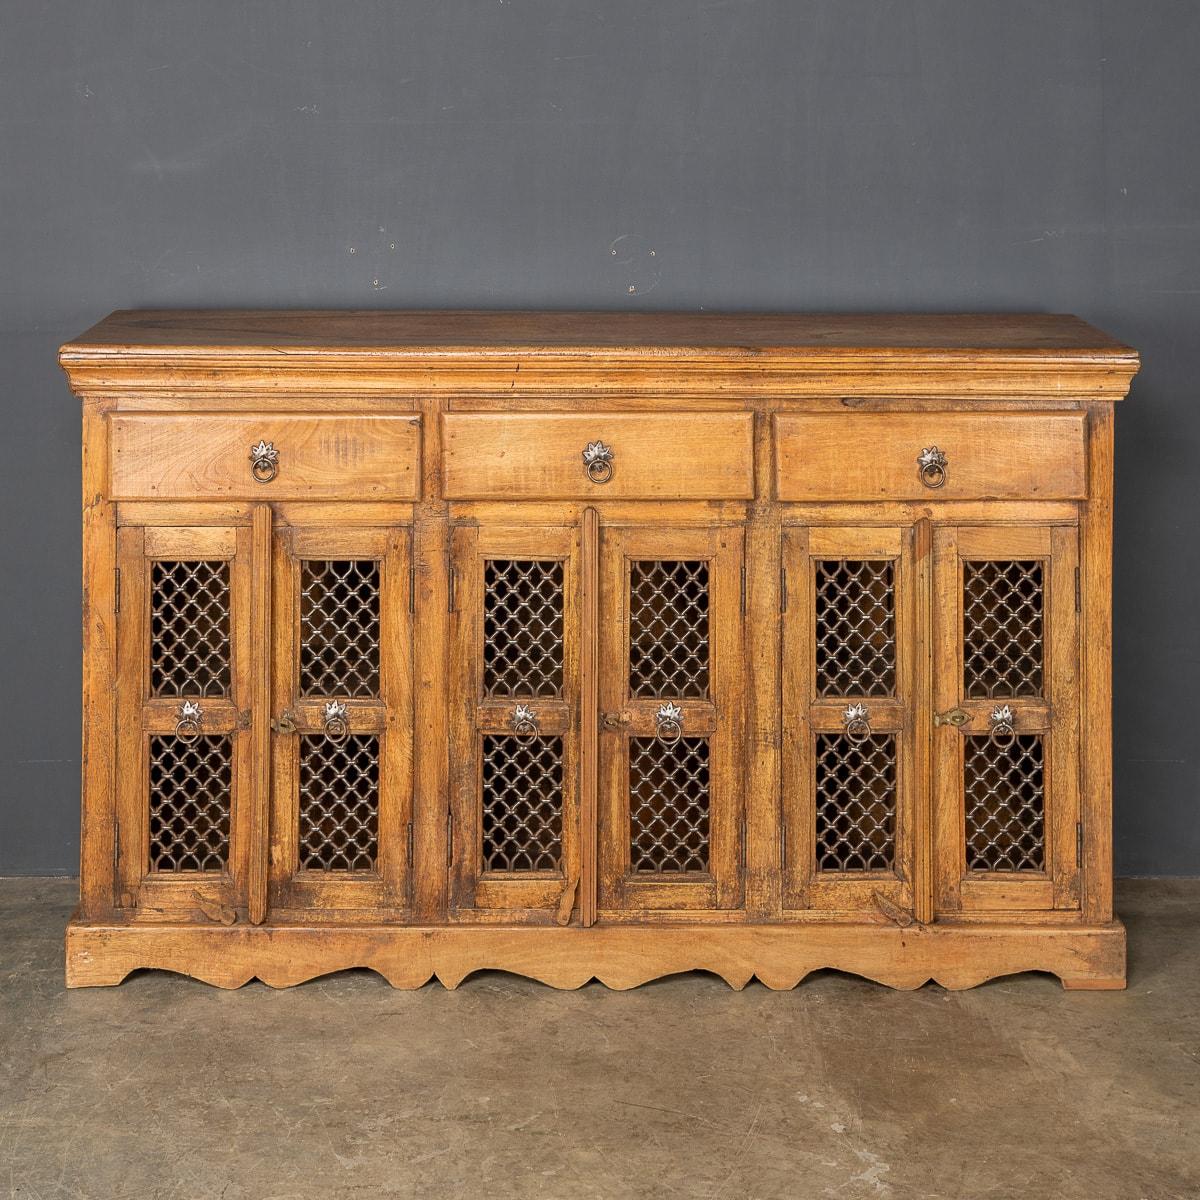 Antique early 20th century French Larder cupboard with three drawers and metal grille fronted doors. A wonderful and rustic piece of statement furniture, ideal for indoors and out.

CONDITION
In great condition - wear as